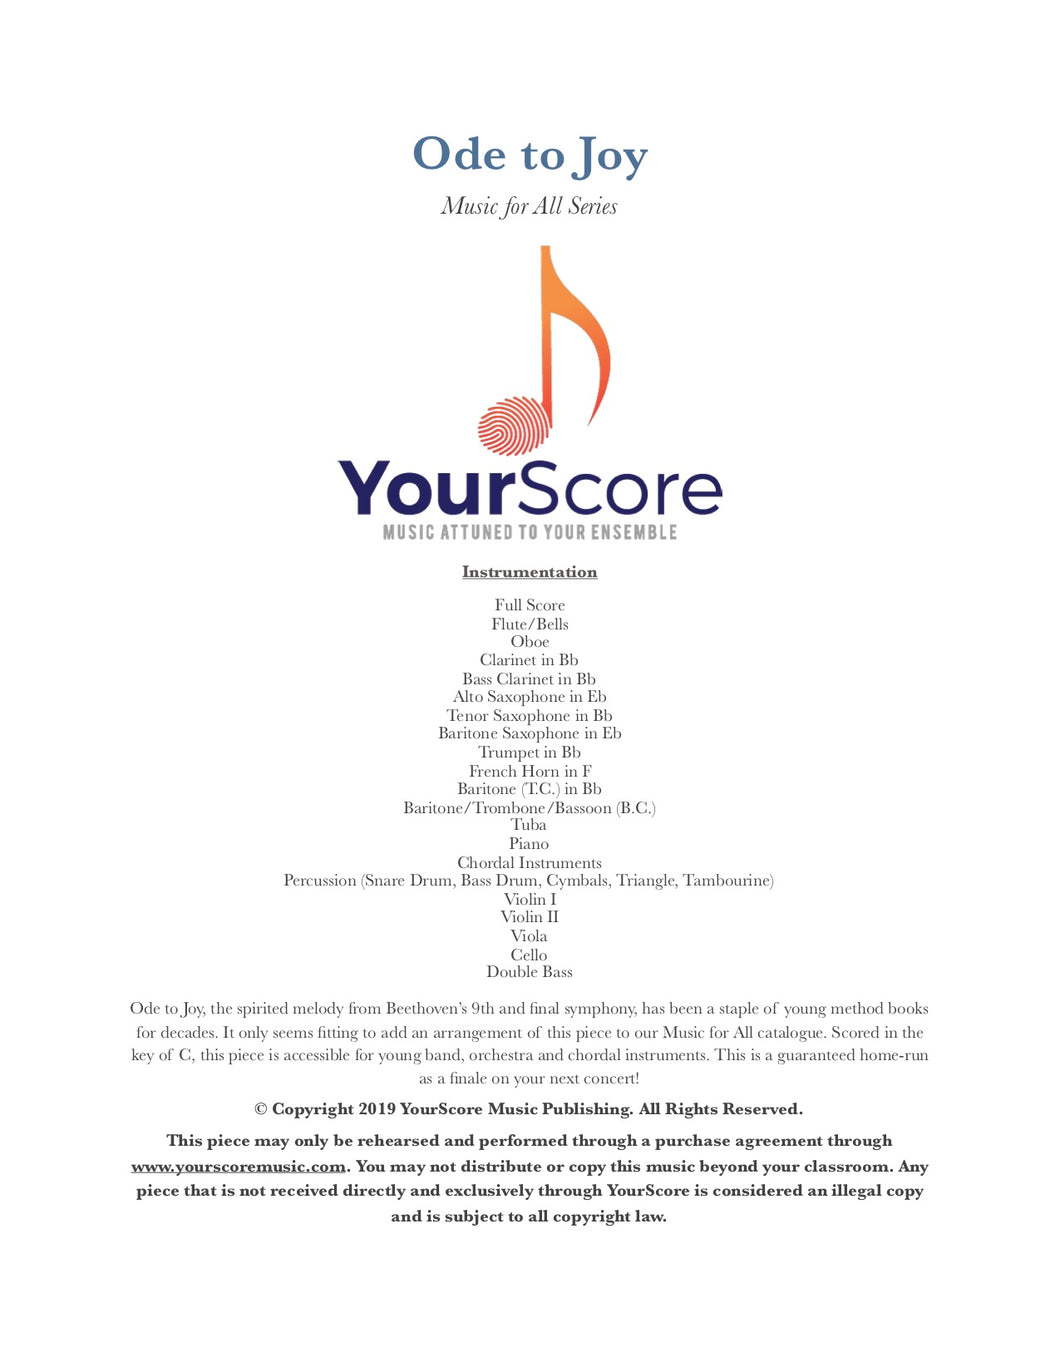 cover of Ode To Joy, an adaptable Elementary Band and Orchestra piece written by Brian Franco